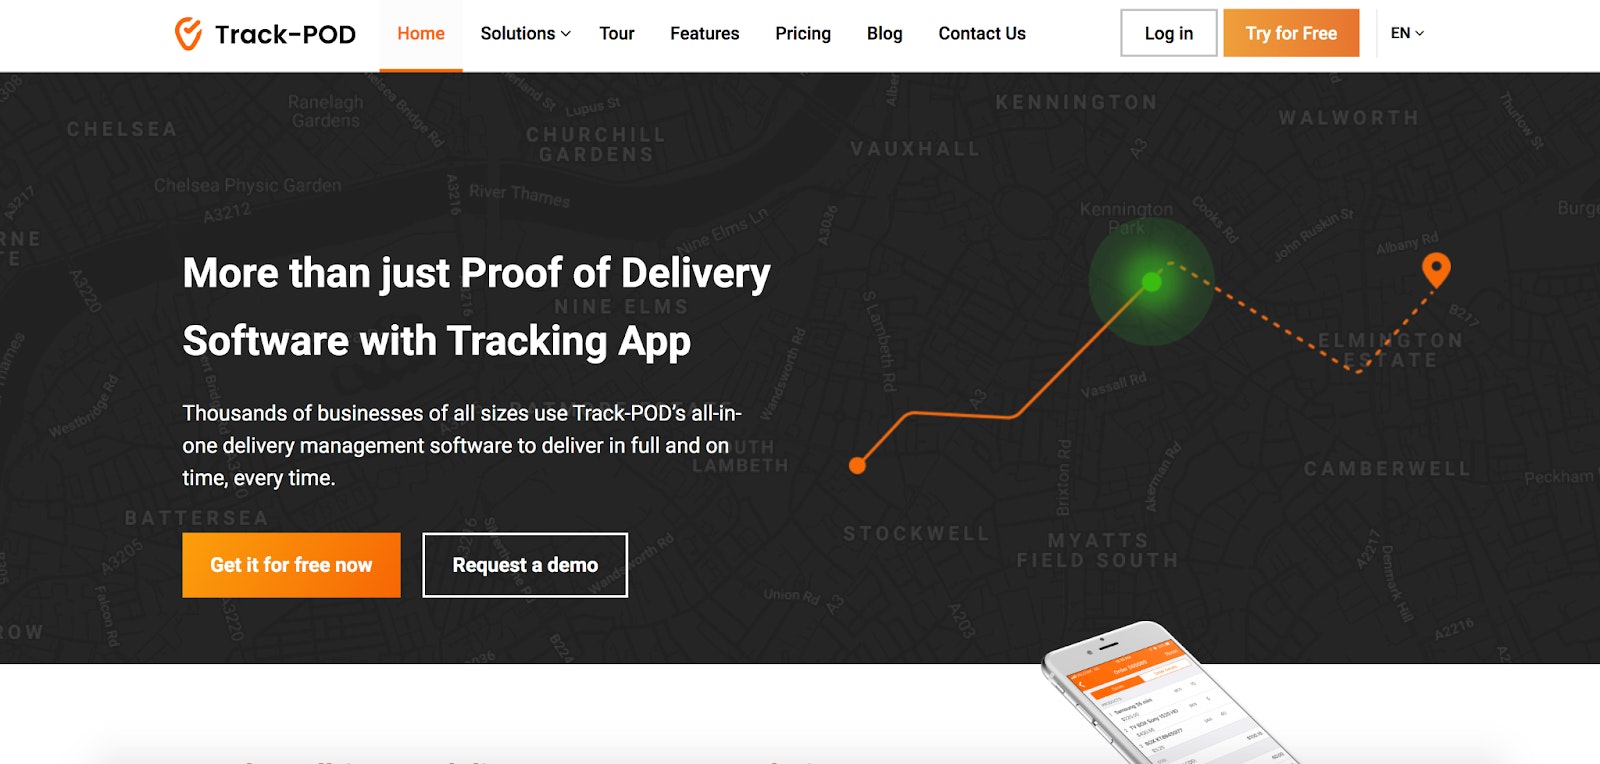 Track-POD home page